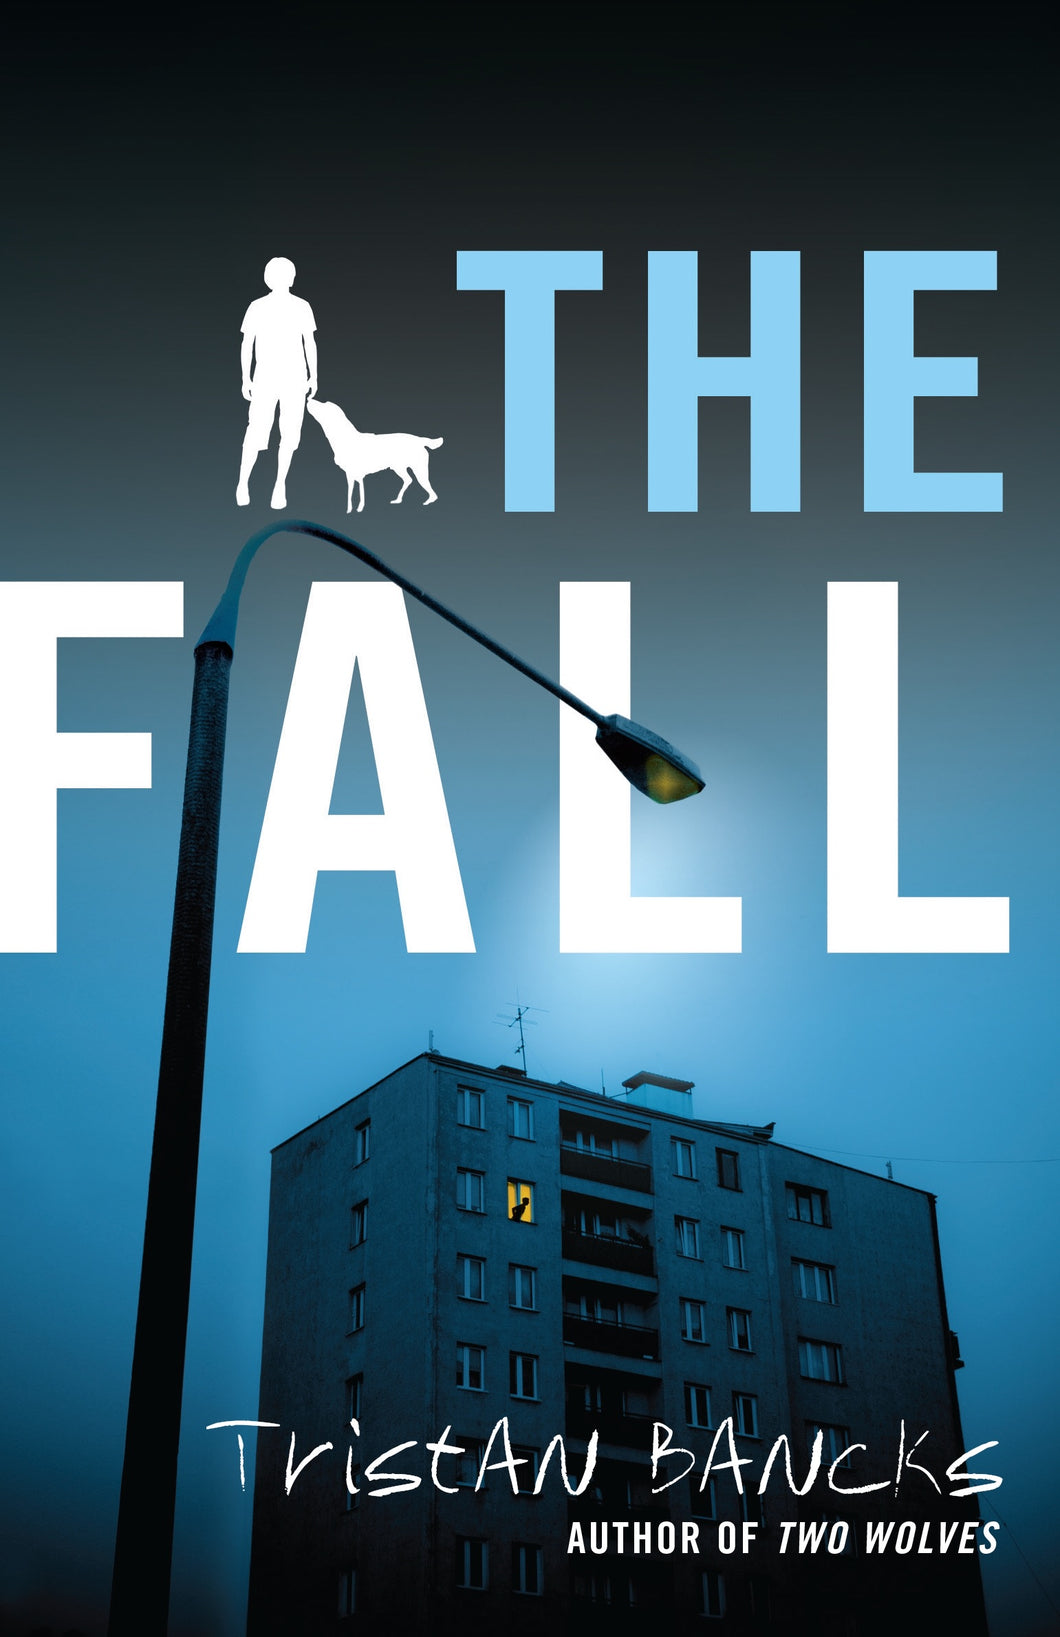 The Fall by Tristan Bancks